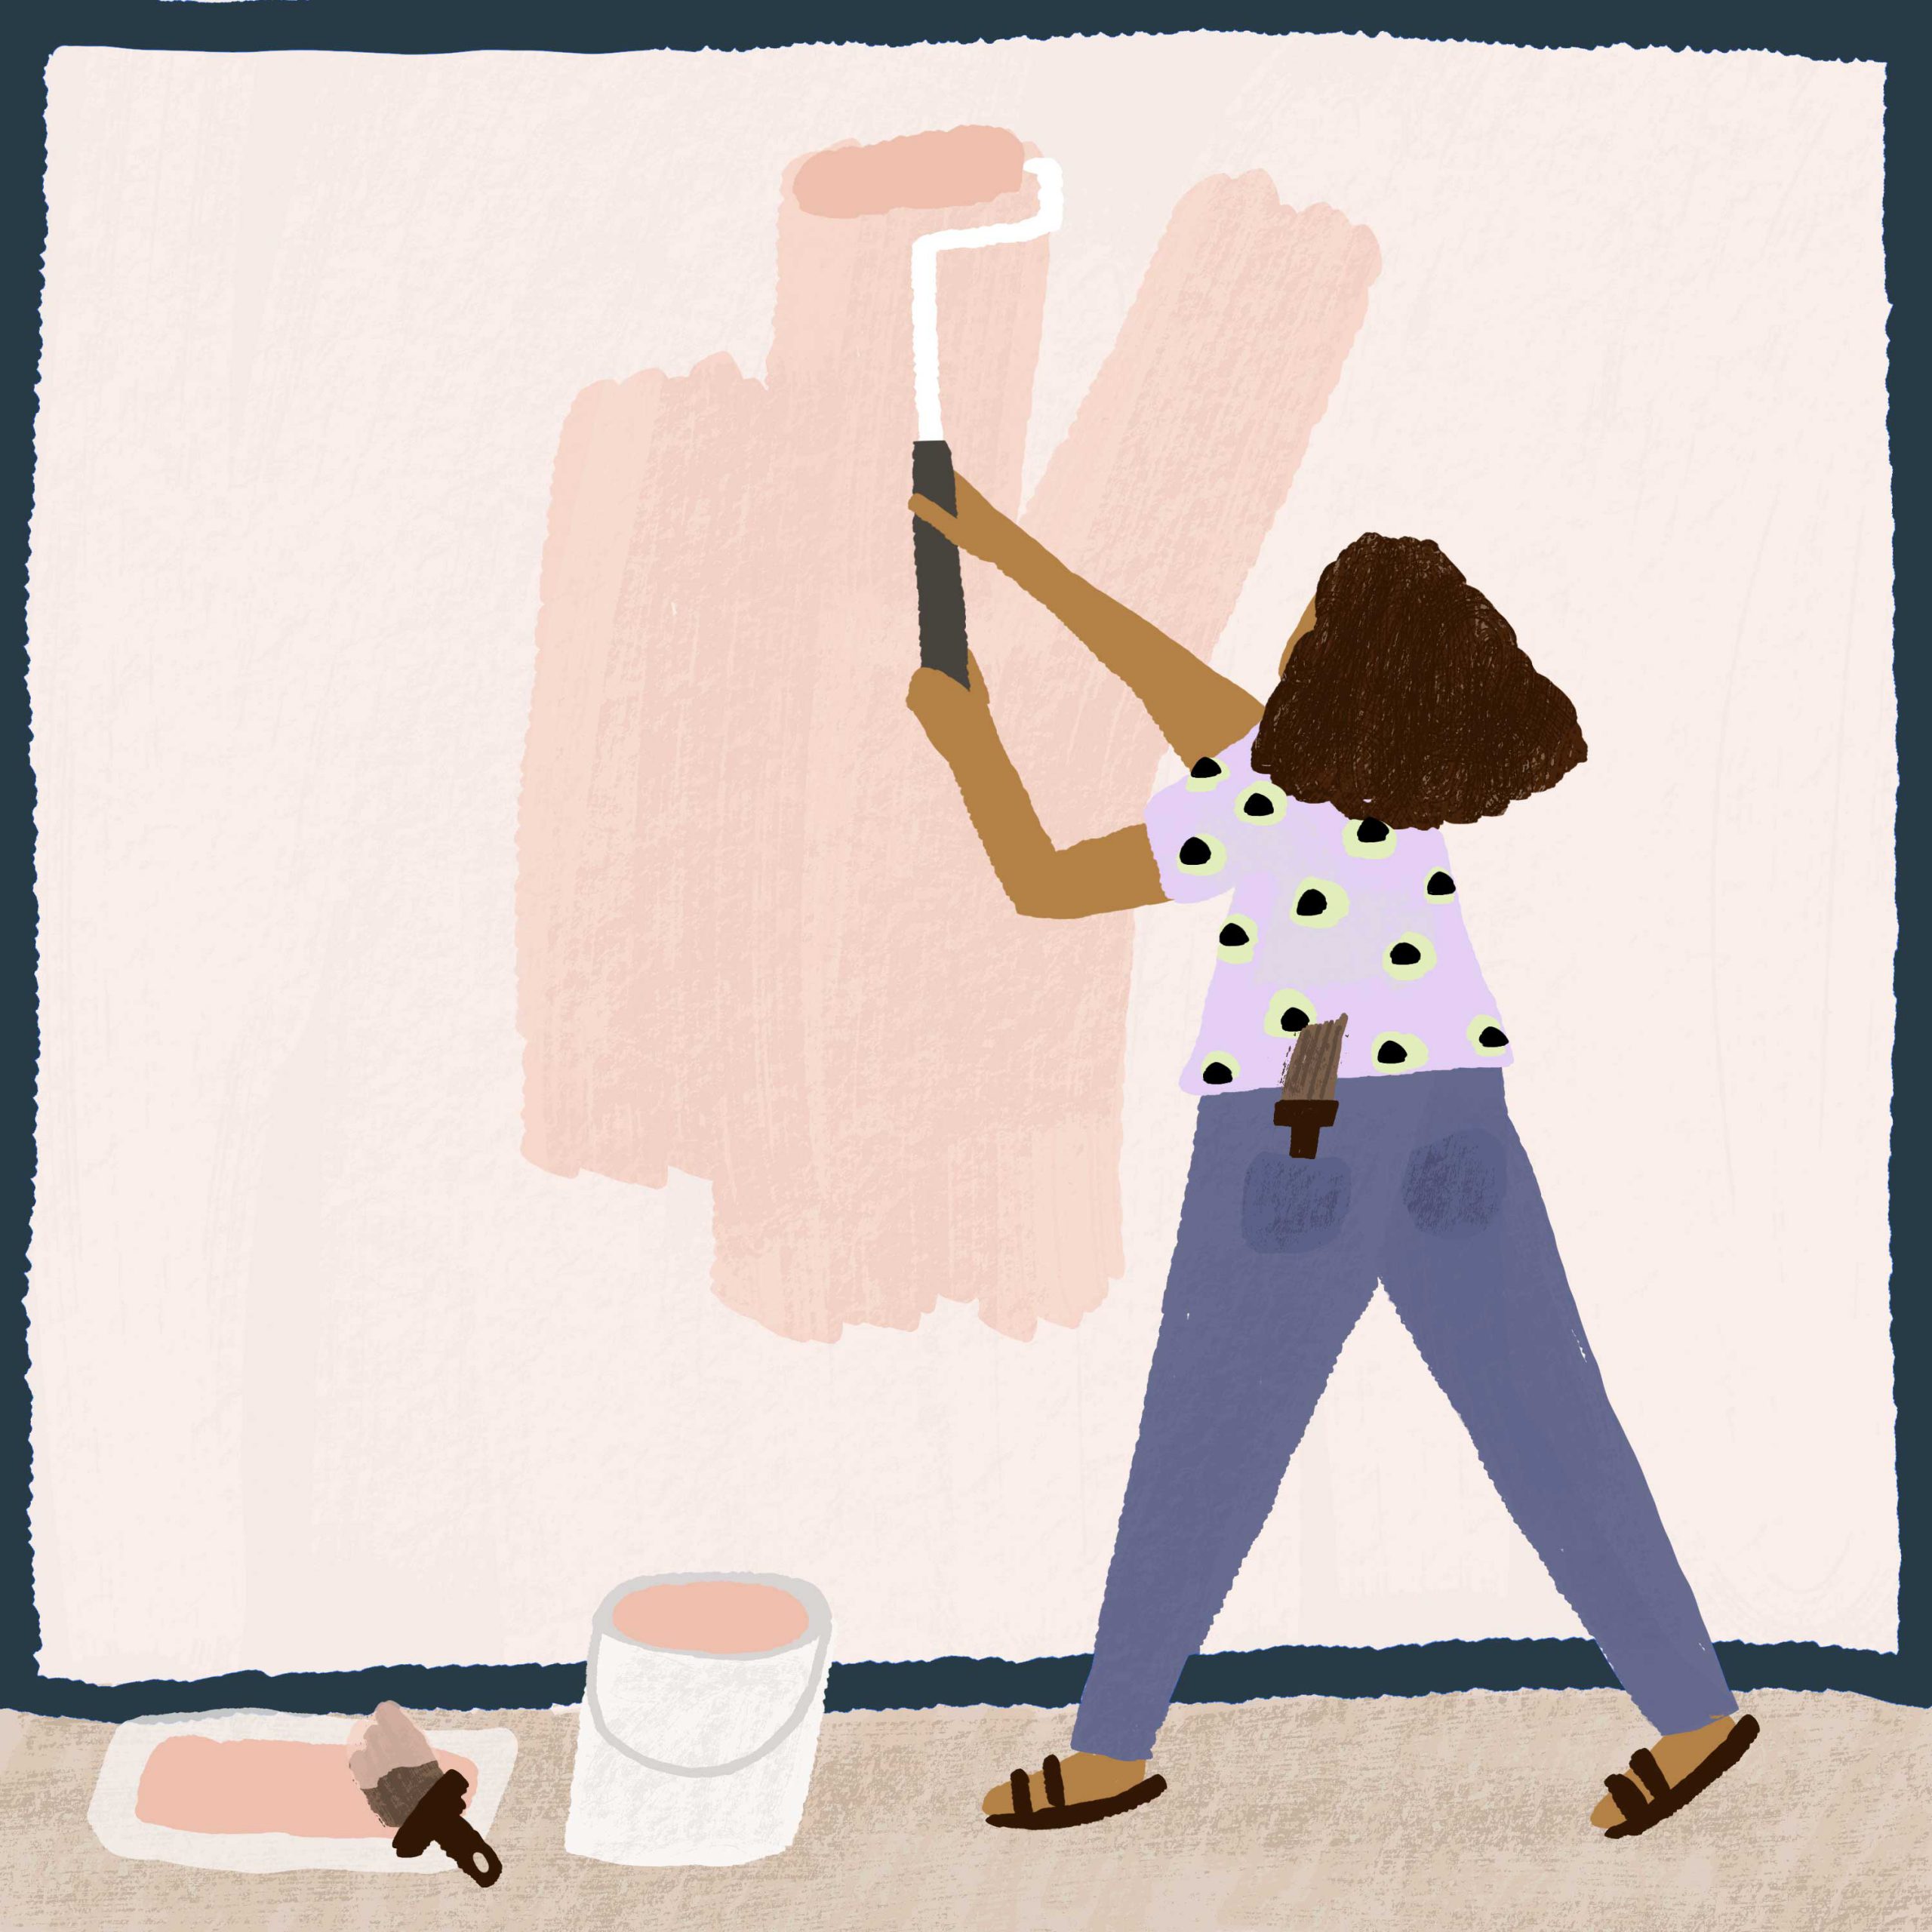 an illustration of a woman painting a wall.